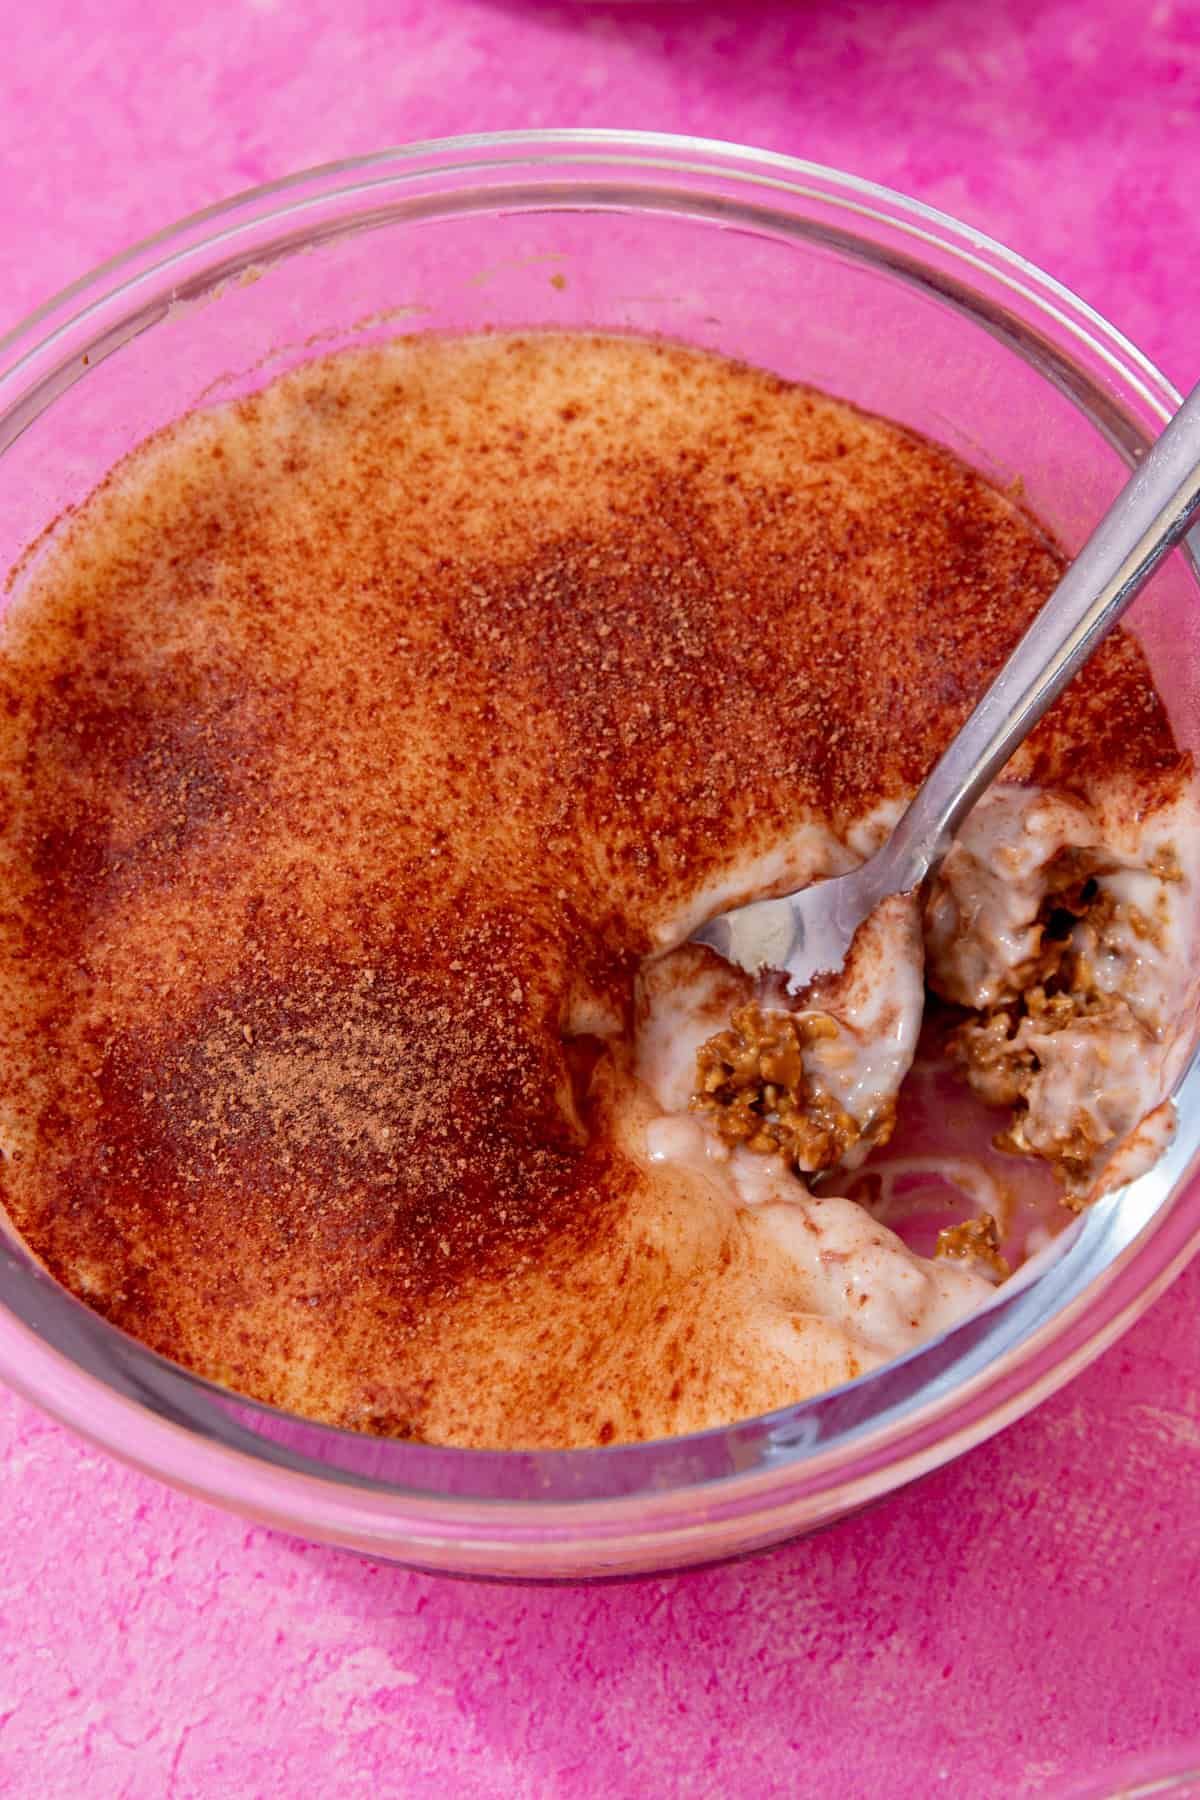 A glass bowl with oats and a yogurt topping with chocolate sprinkled over the top with a spoon taking a portion.